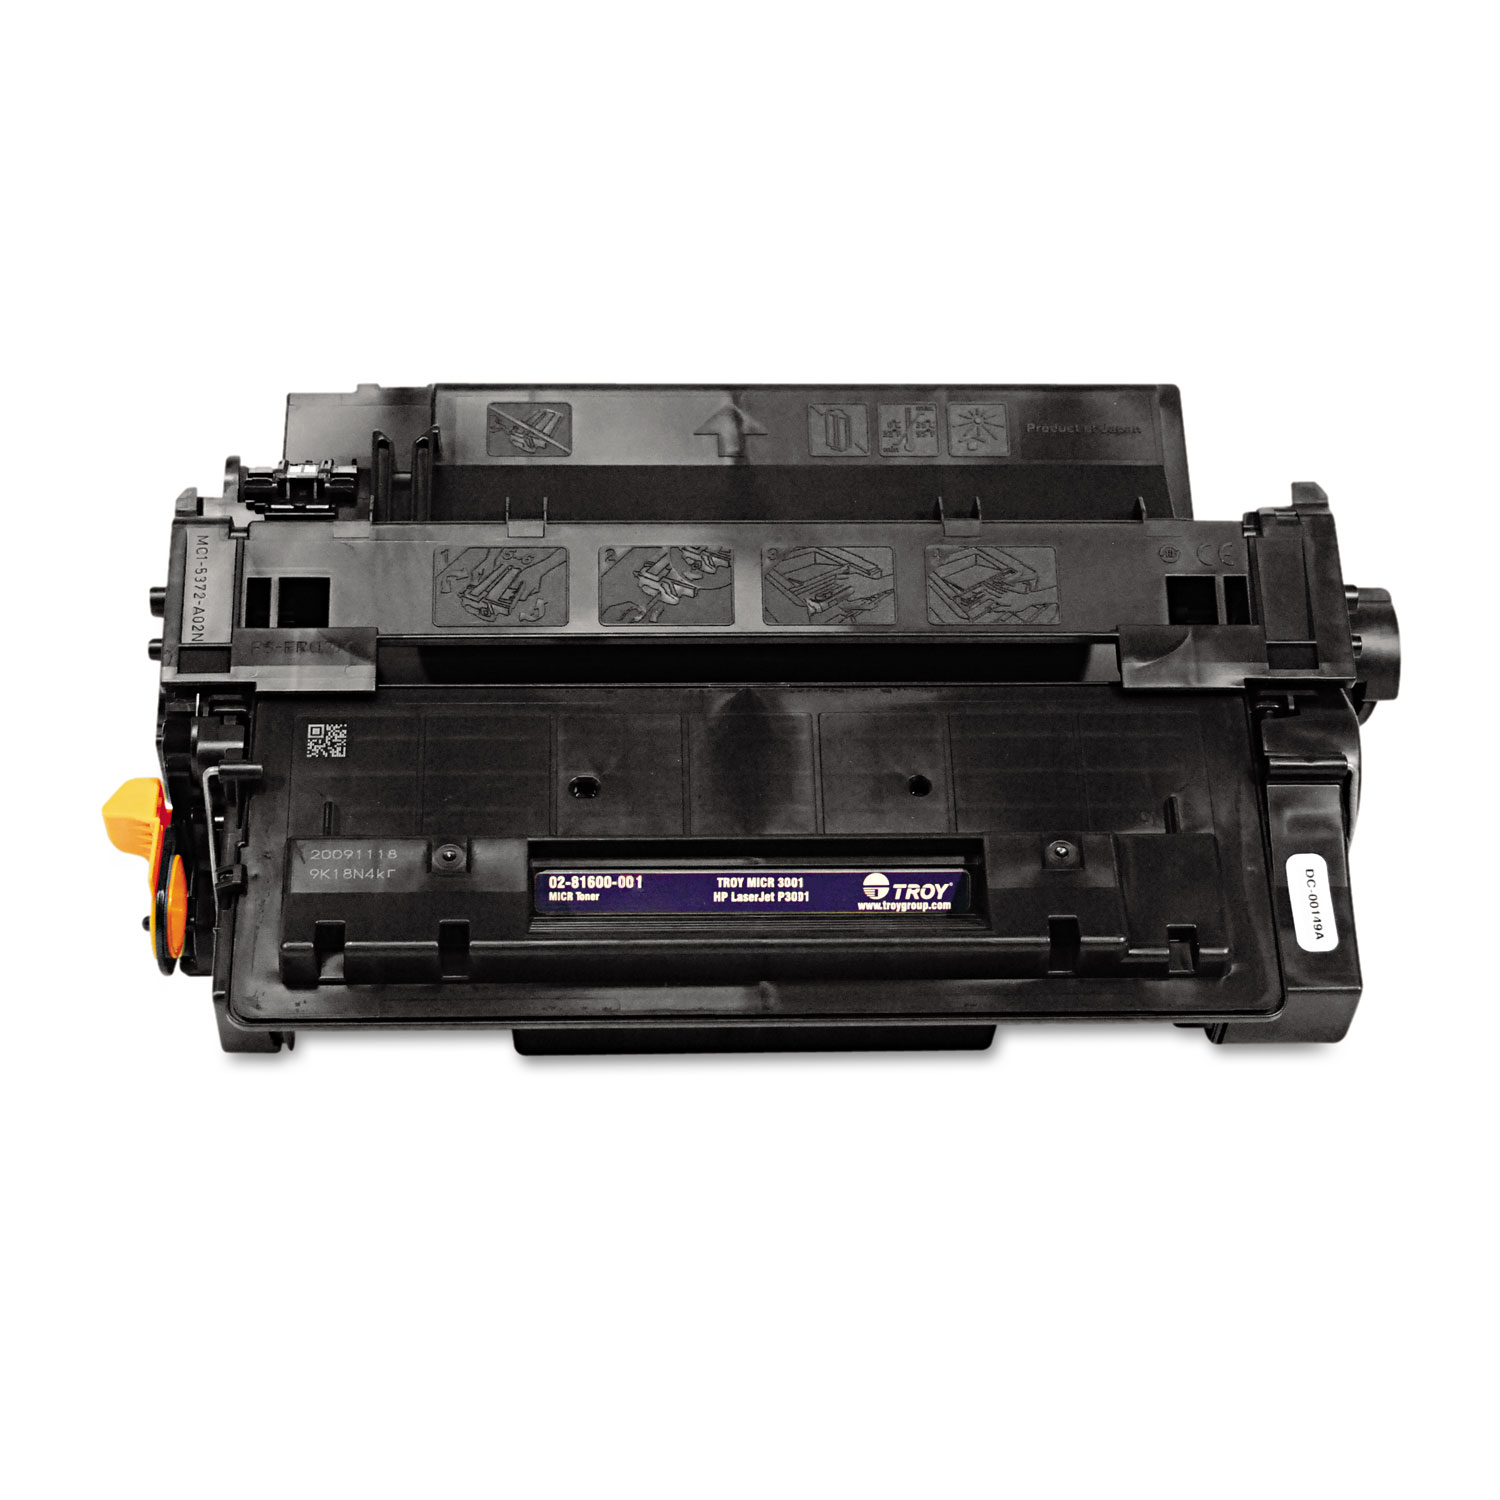  TROY 02-81600-001 0281600001 55A MICR Toner Secure, Alternative for HP CE255A, Black (TRS0281600001) 